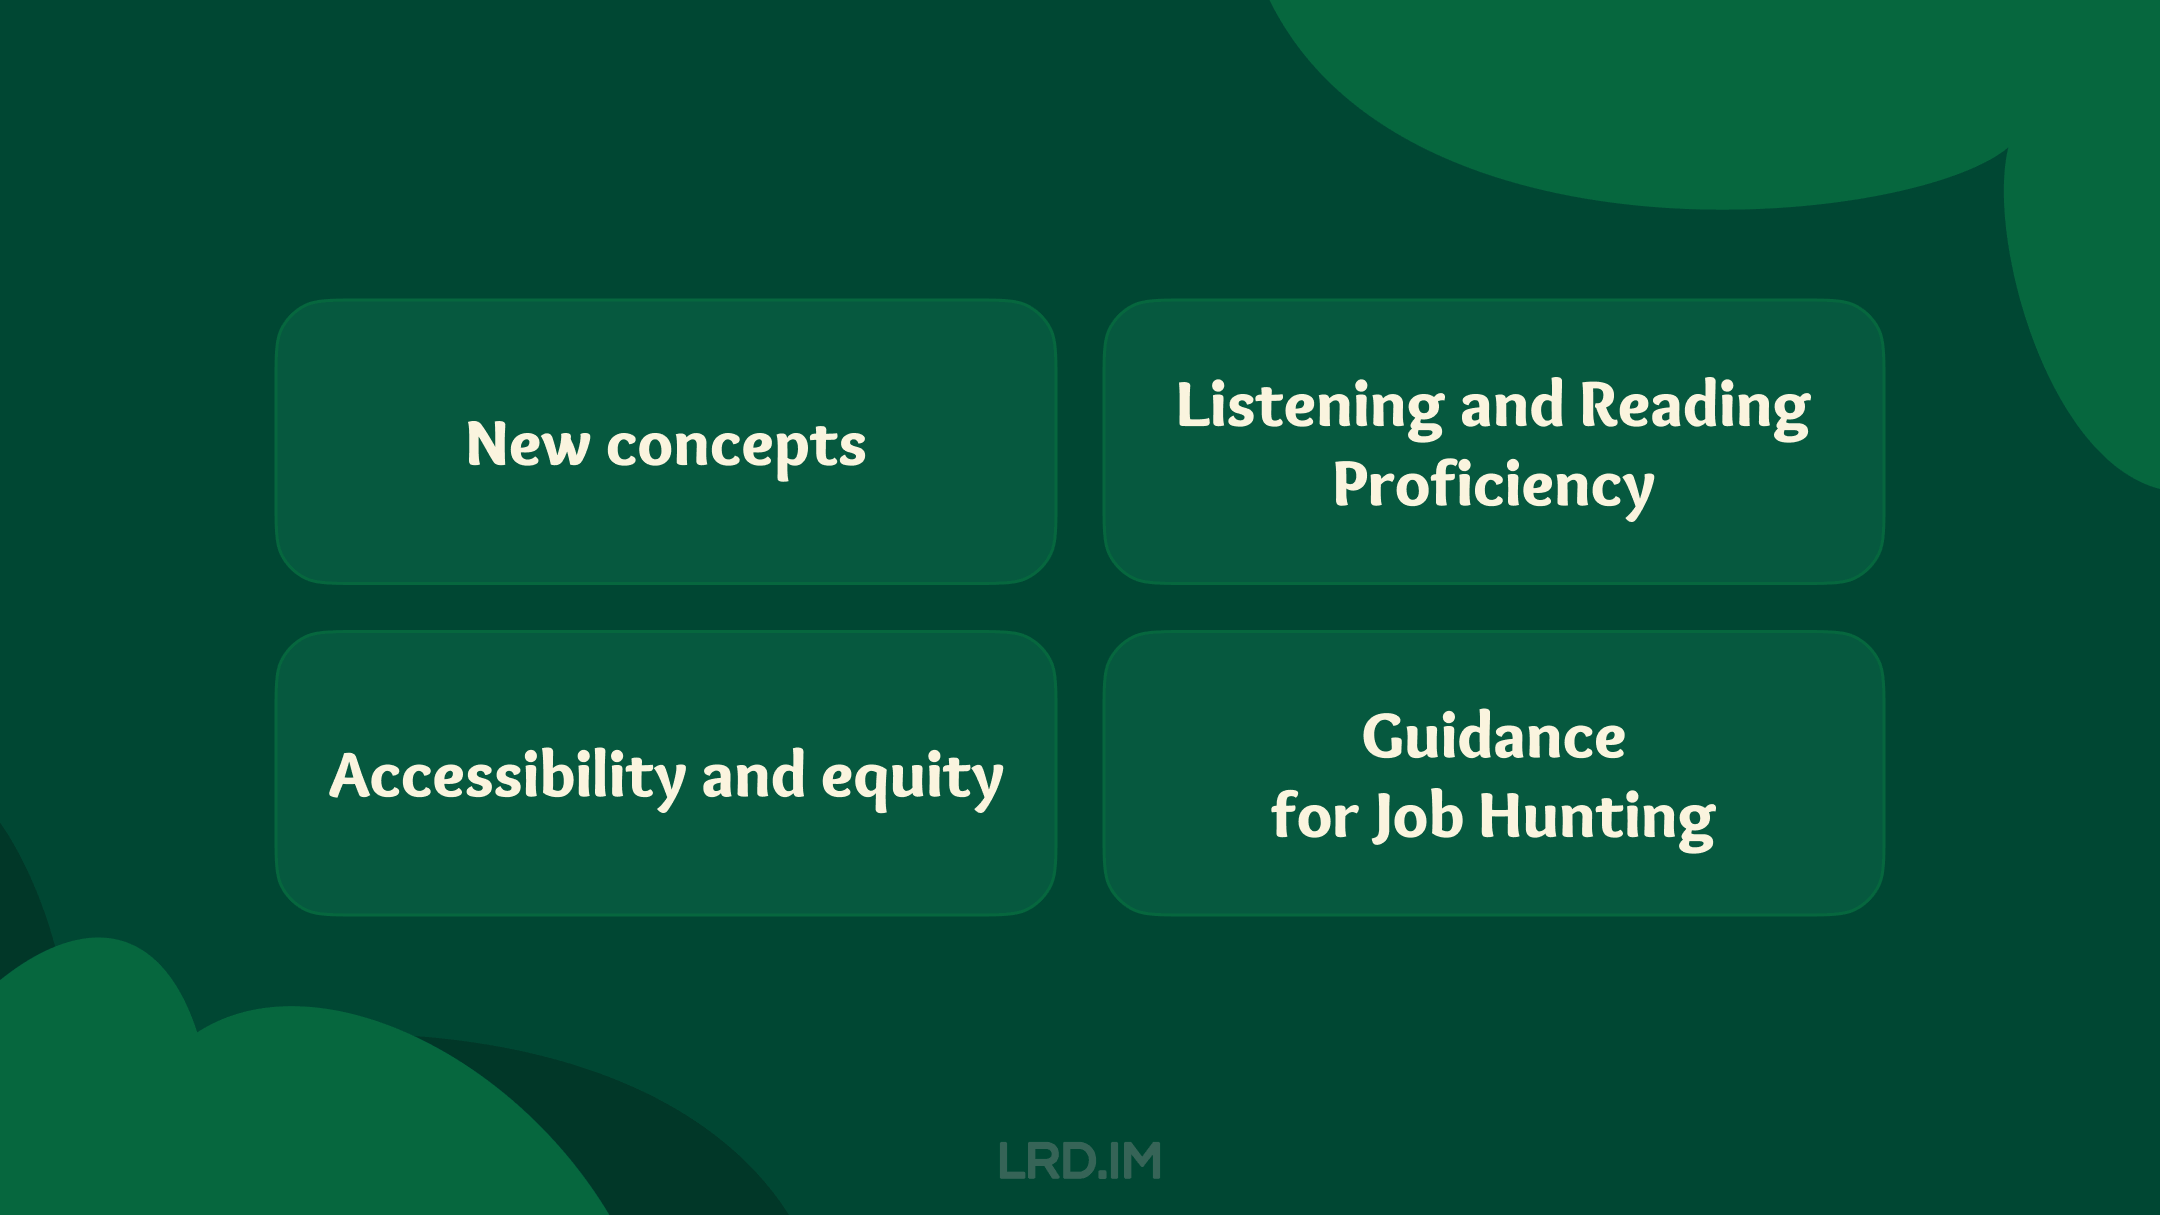 The image shows a dark green presentation slide with four text boxes labeled “New concepts,” “Listening and Reading Proficiency,” “Accessibility and equity,” and “Guidance for Job Hunting.” The text is in white and each box has a rounded edge.